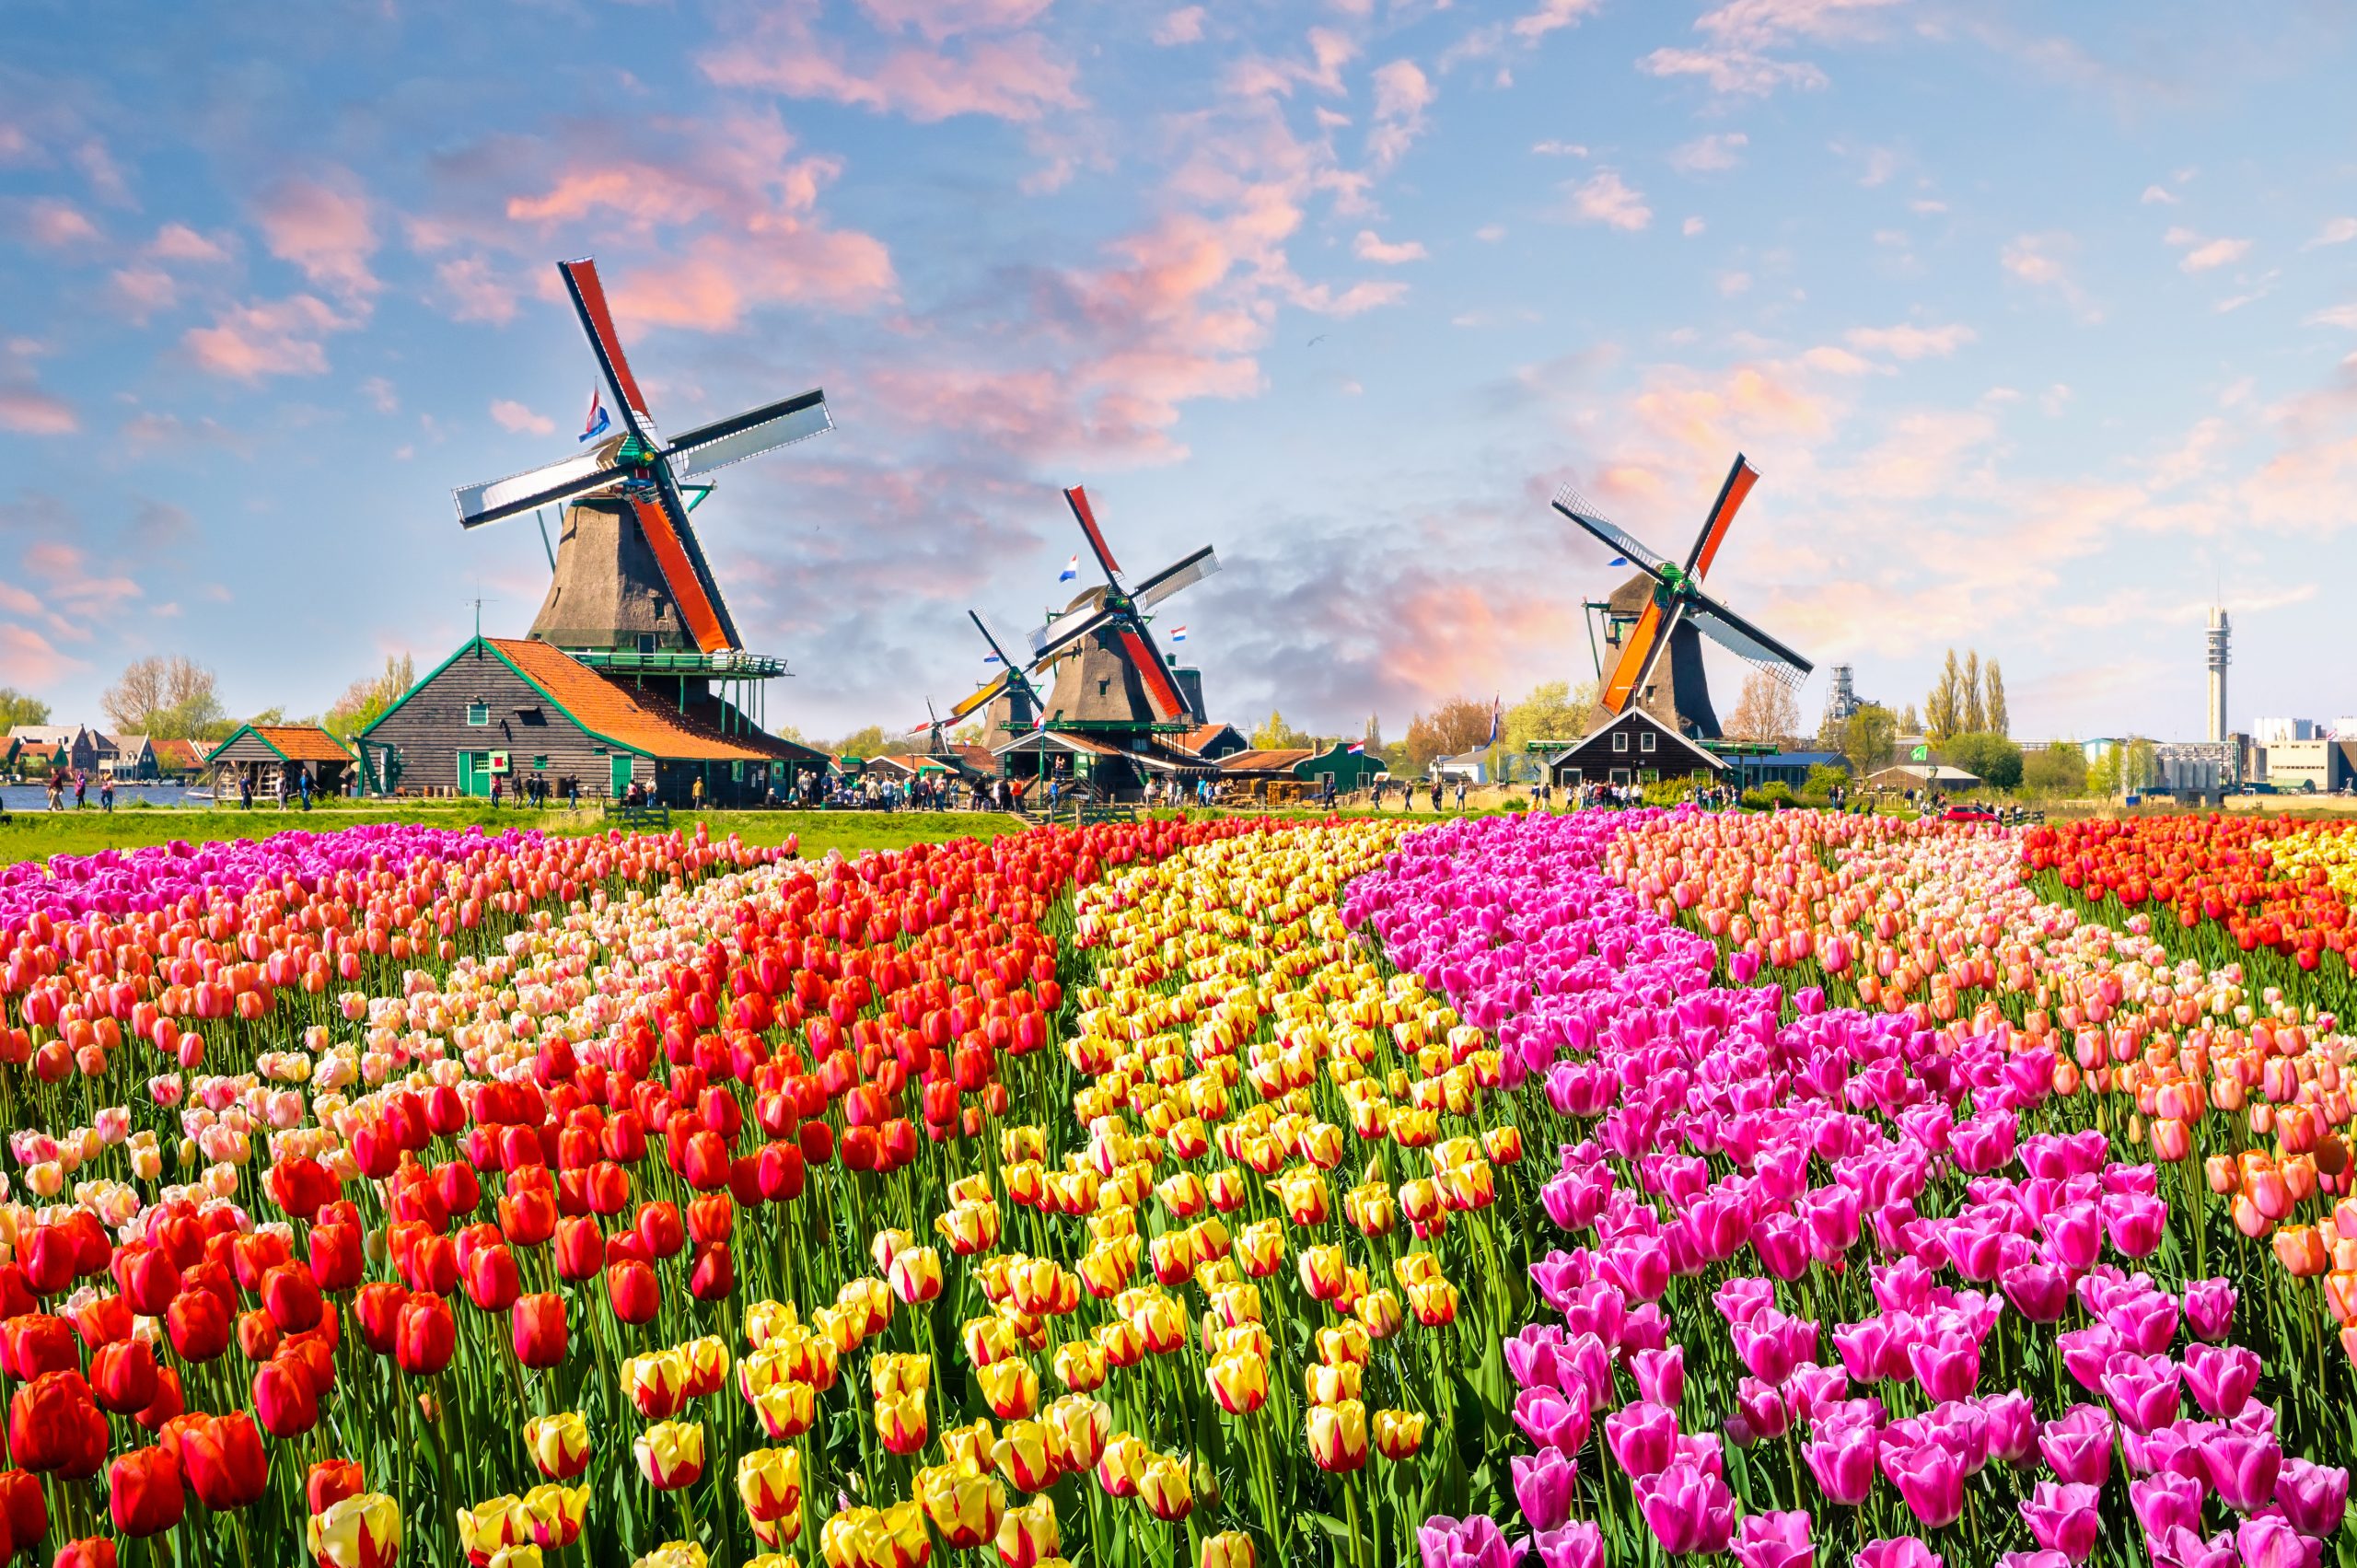 Windmills and tulips in the Keukenhof Gardens in the Netherlands